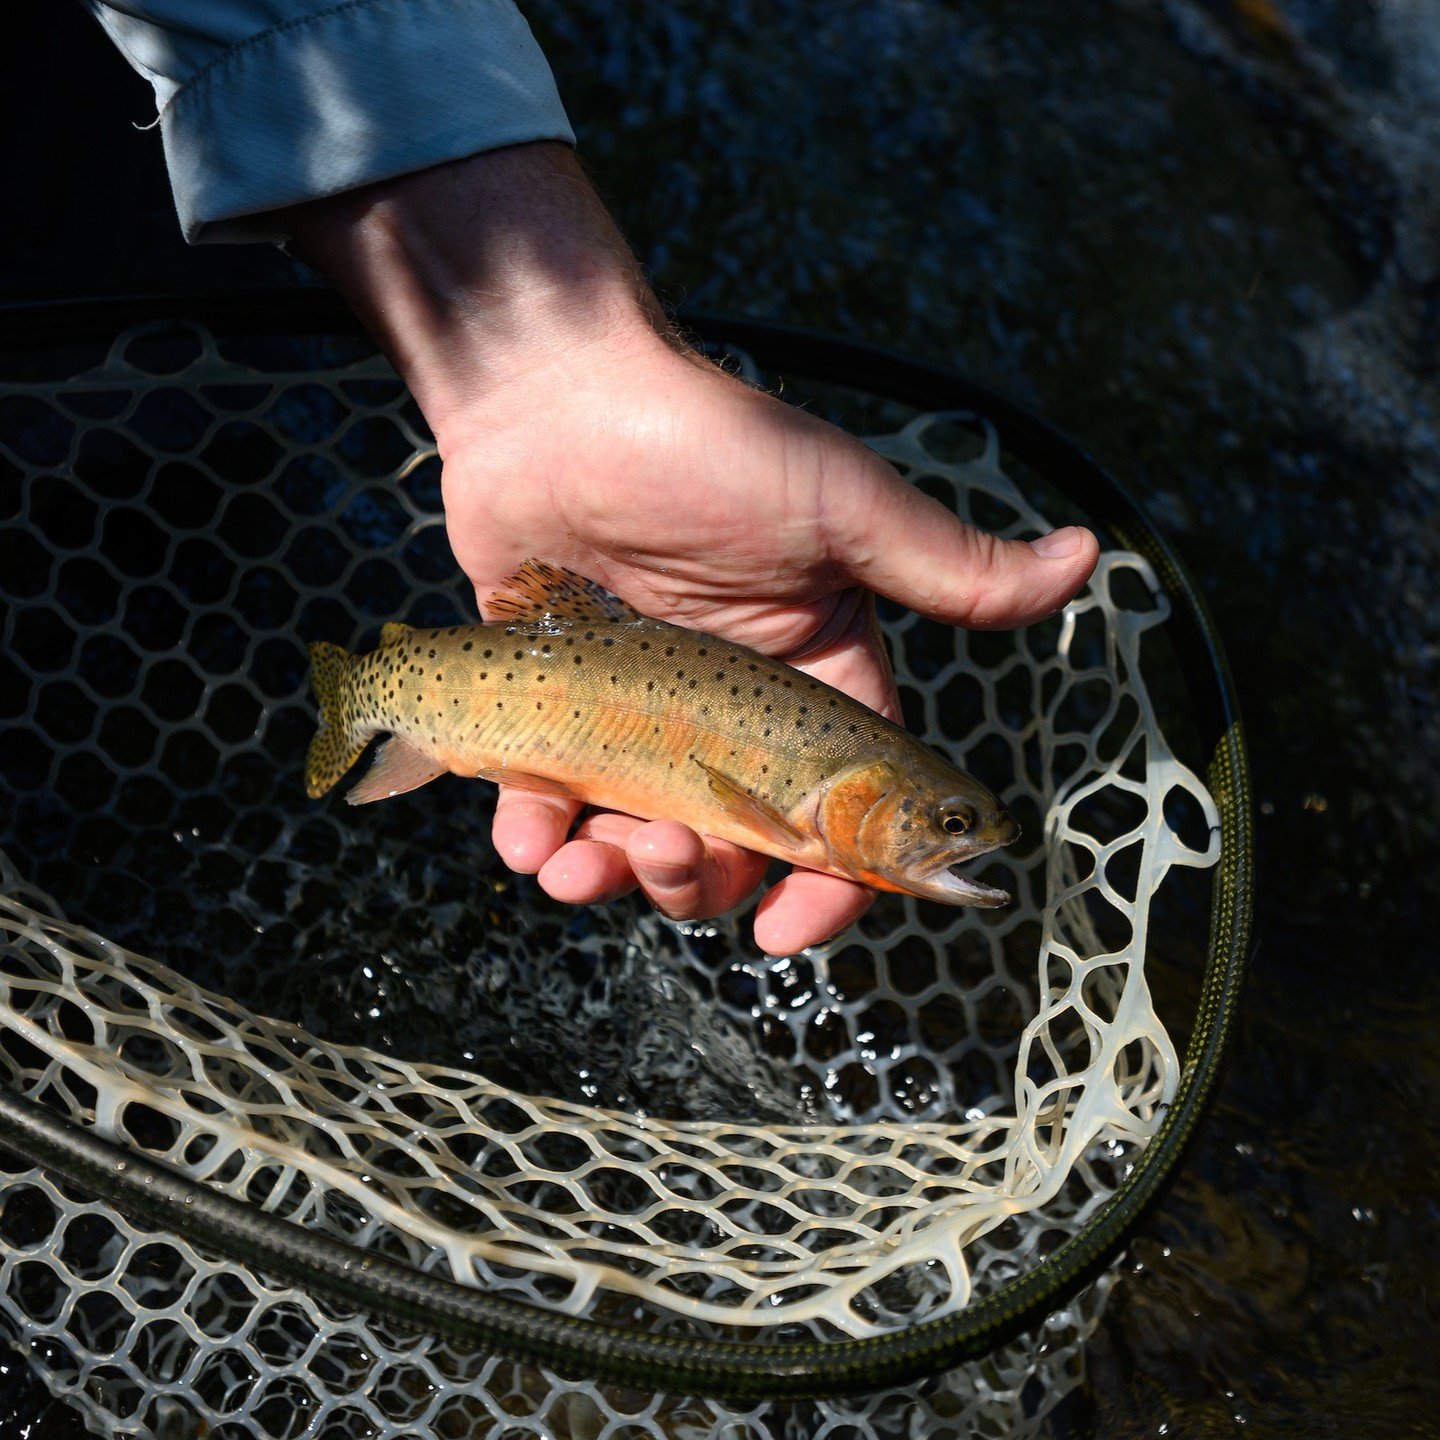 Colorado Parks and Wildlife has scheduled two public meetings to discuss proposed fishing regulation changes that are aimed at advancing conservation goals related to Rio Grande cutthroat trout.

One meeting will be held in Westcliffe and another in 